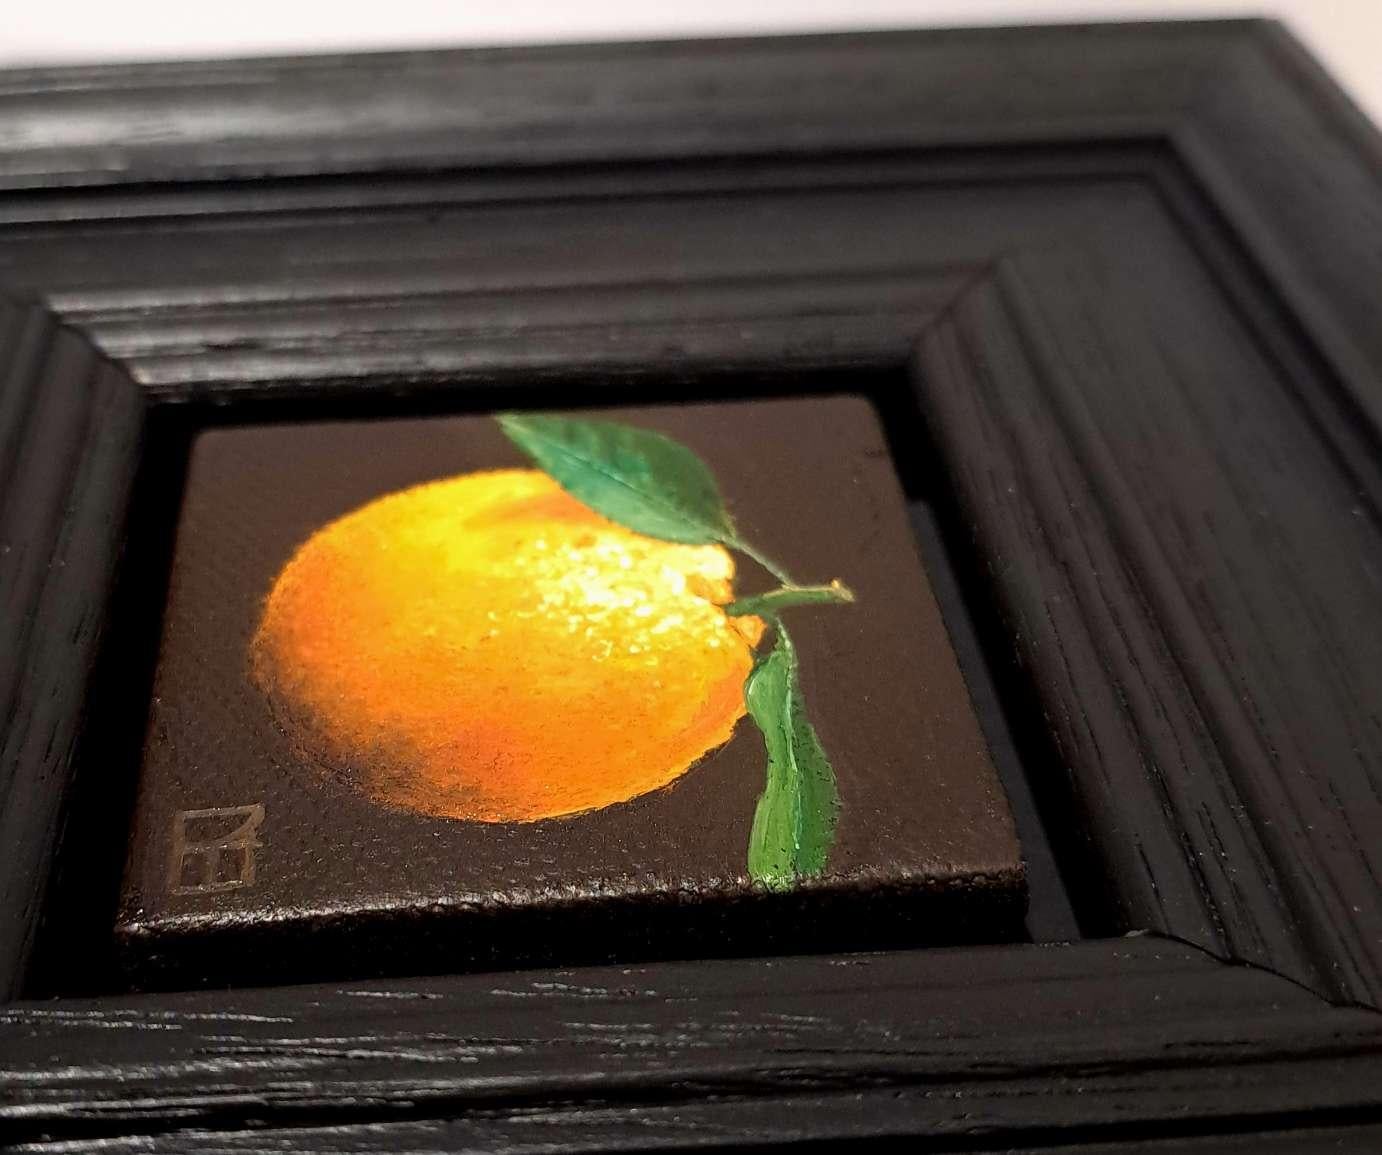 Pocket Yellowy Orange Clementine is an original oil painting by Dani Humberstone as part of her Pocket Painting series featuring small scale realistic oil paintings, with a nod to baroque still life painting. The paintings are set in a black wood